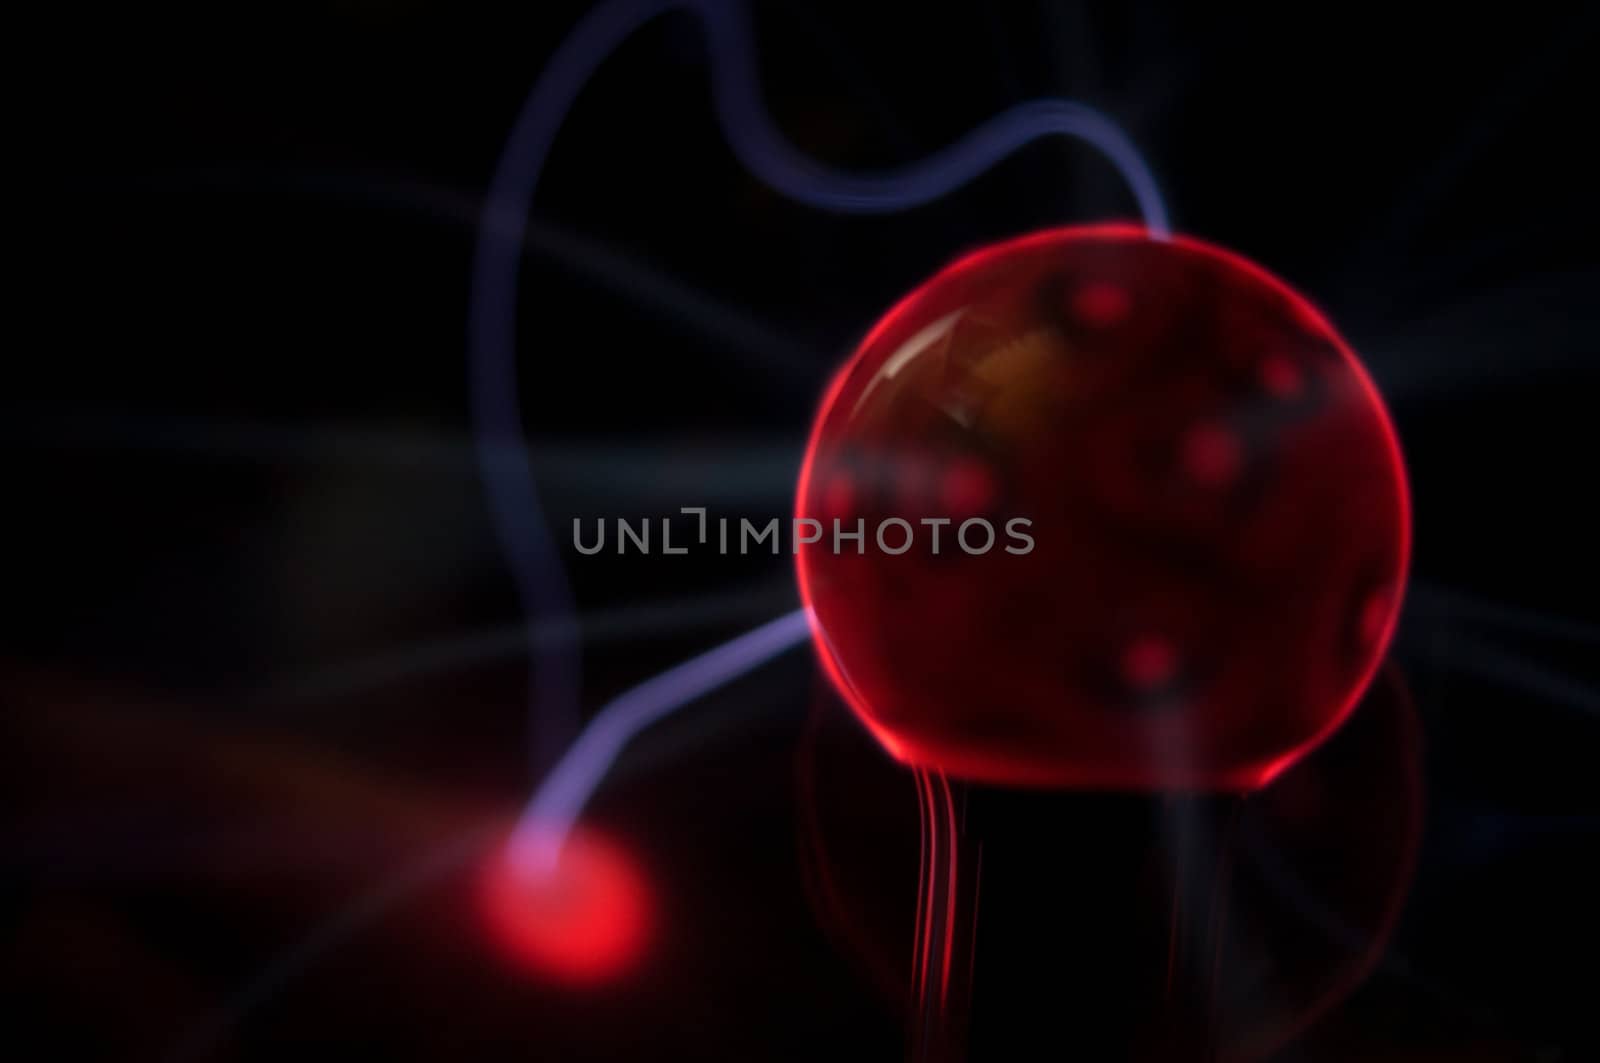 Electric red and blue retro plasma light ball with red and blue surges of light